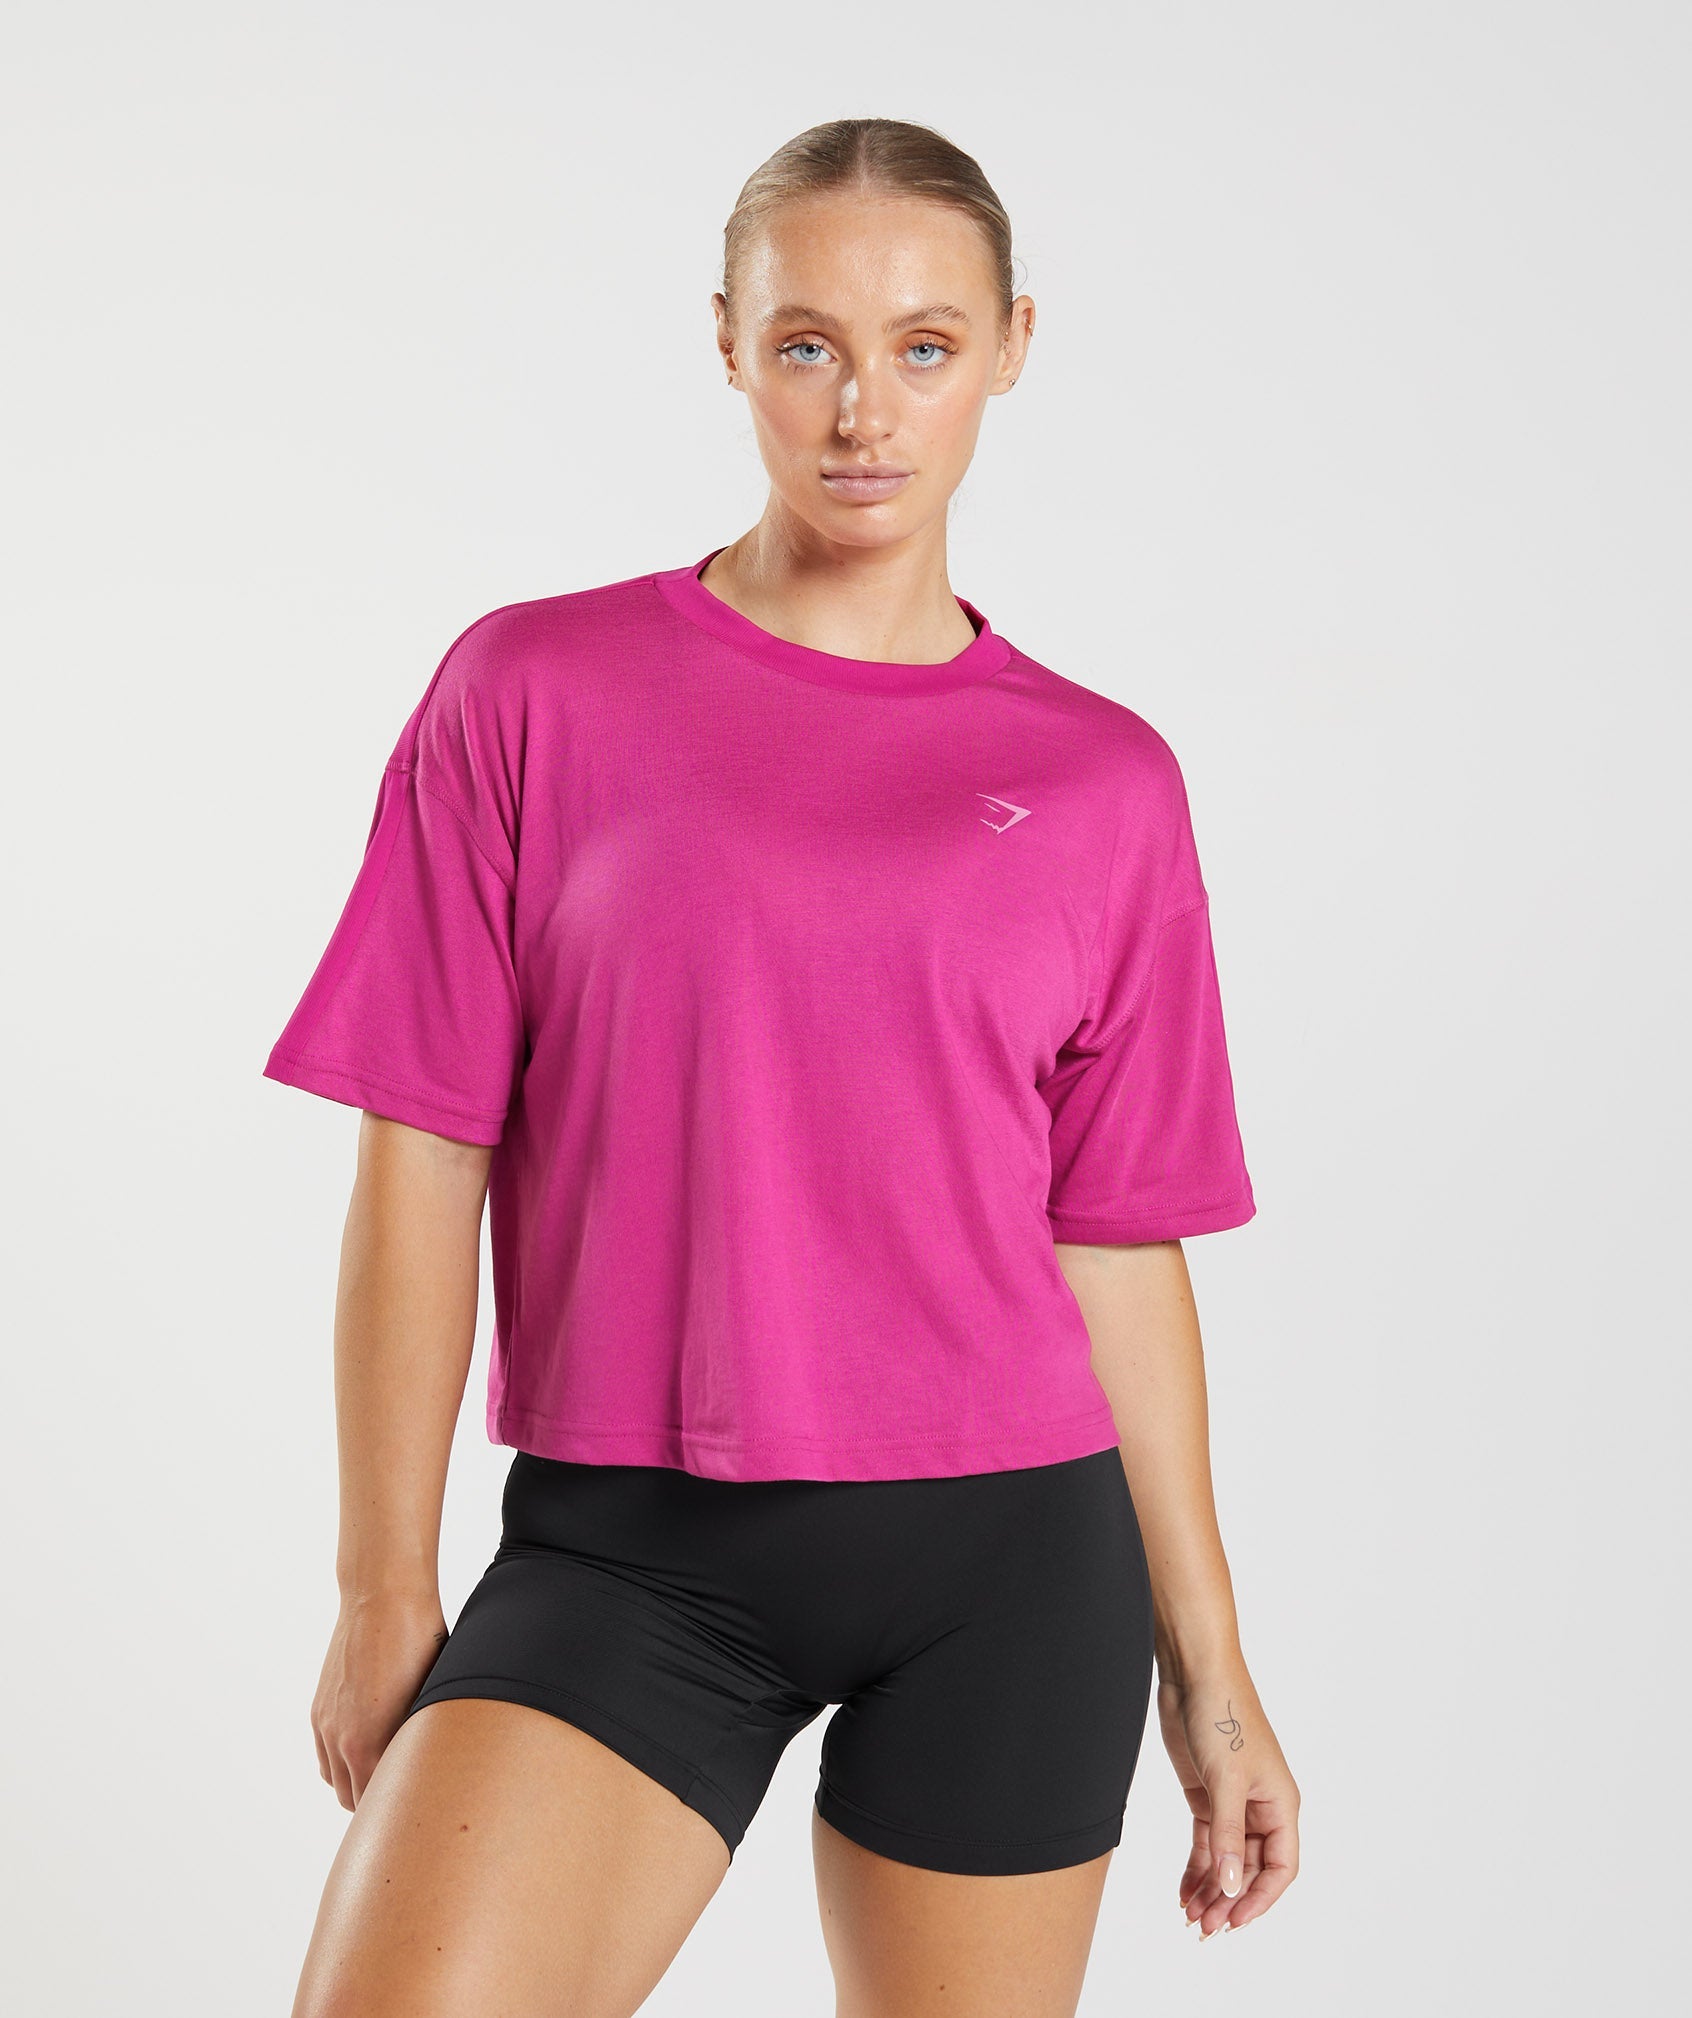 GS Power Midi Top in Magenta Pink - view 1